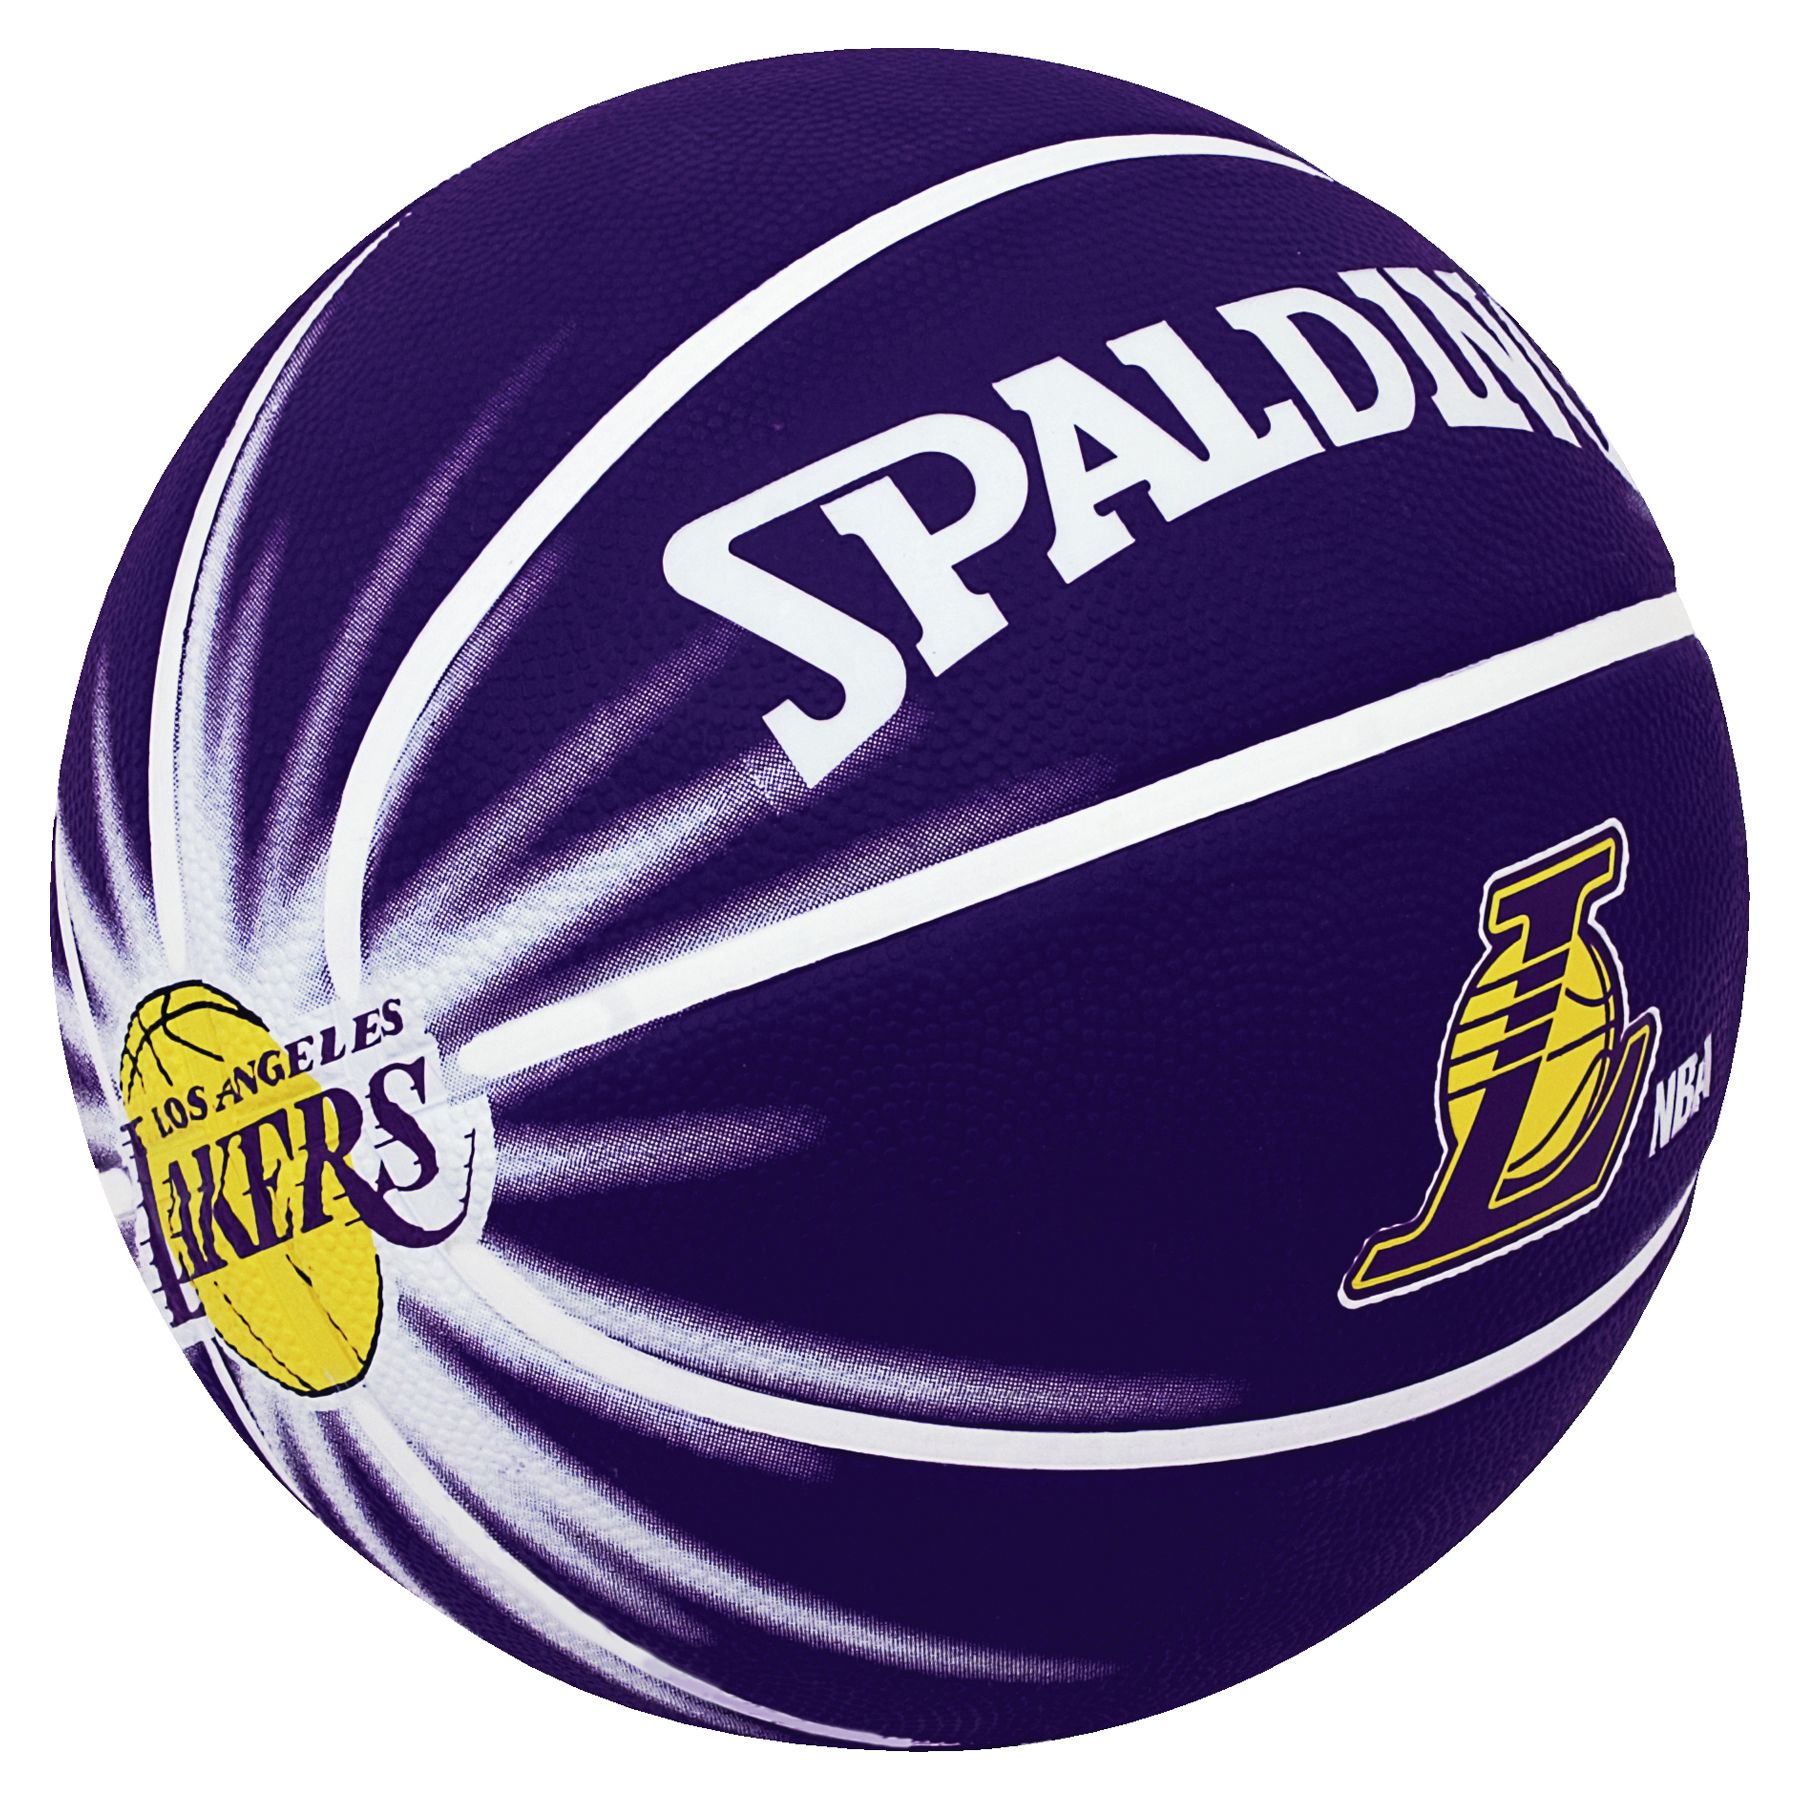 UPC 029321637245 product image for Spalding Los Angeles Lakers Basketball | upcitemdb.com